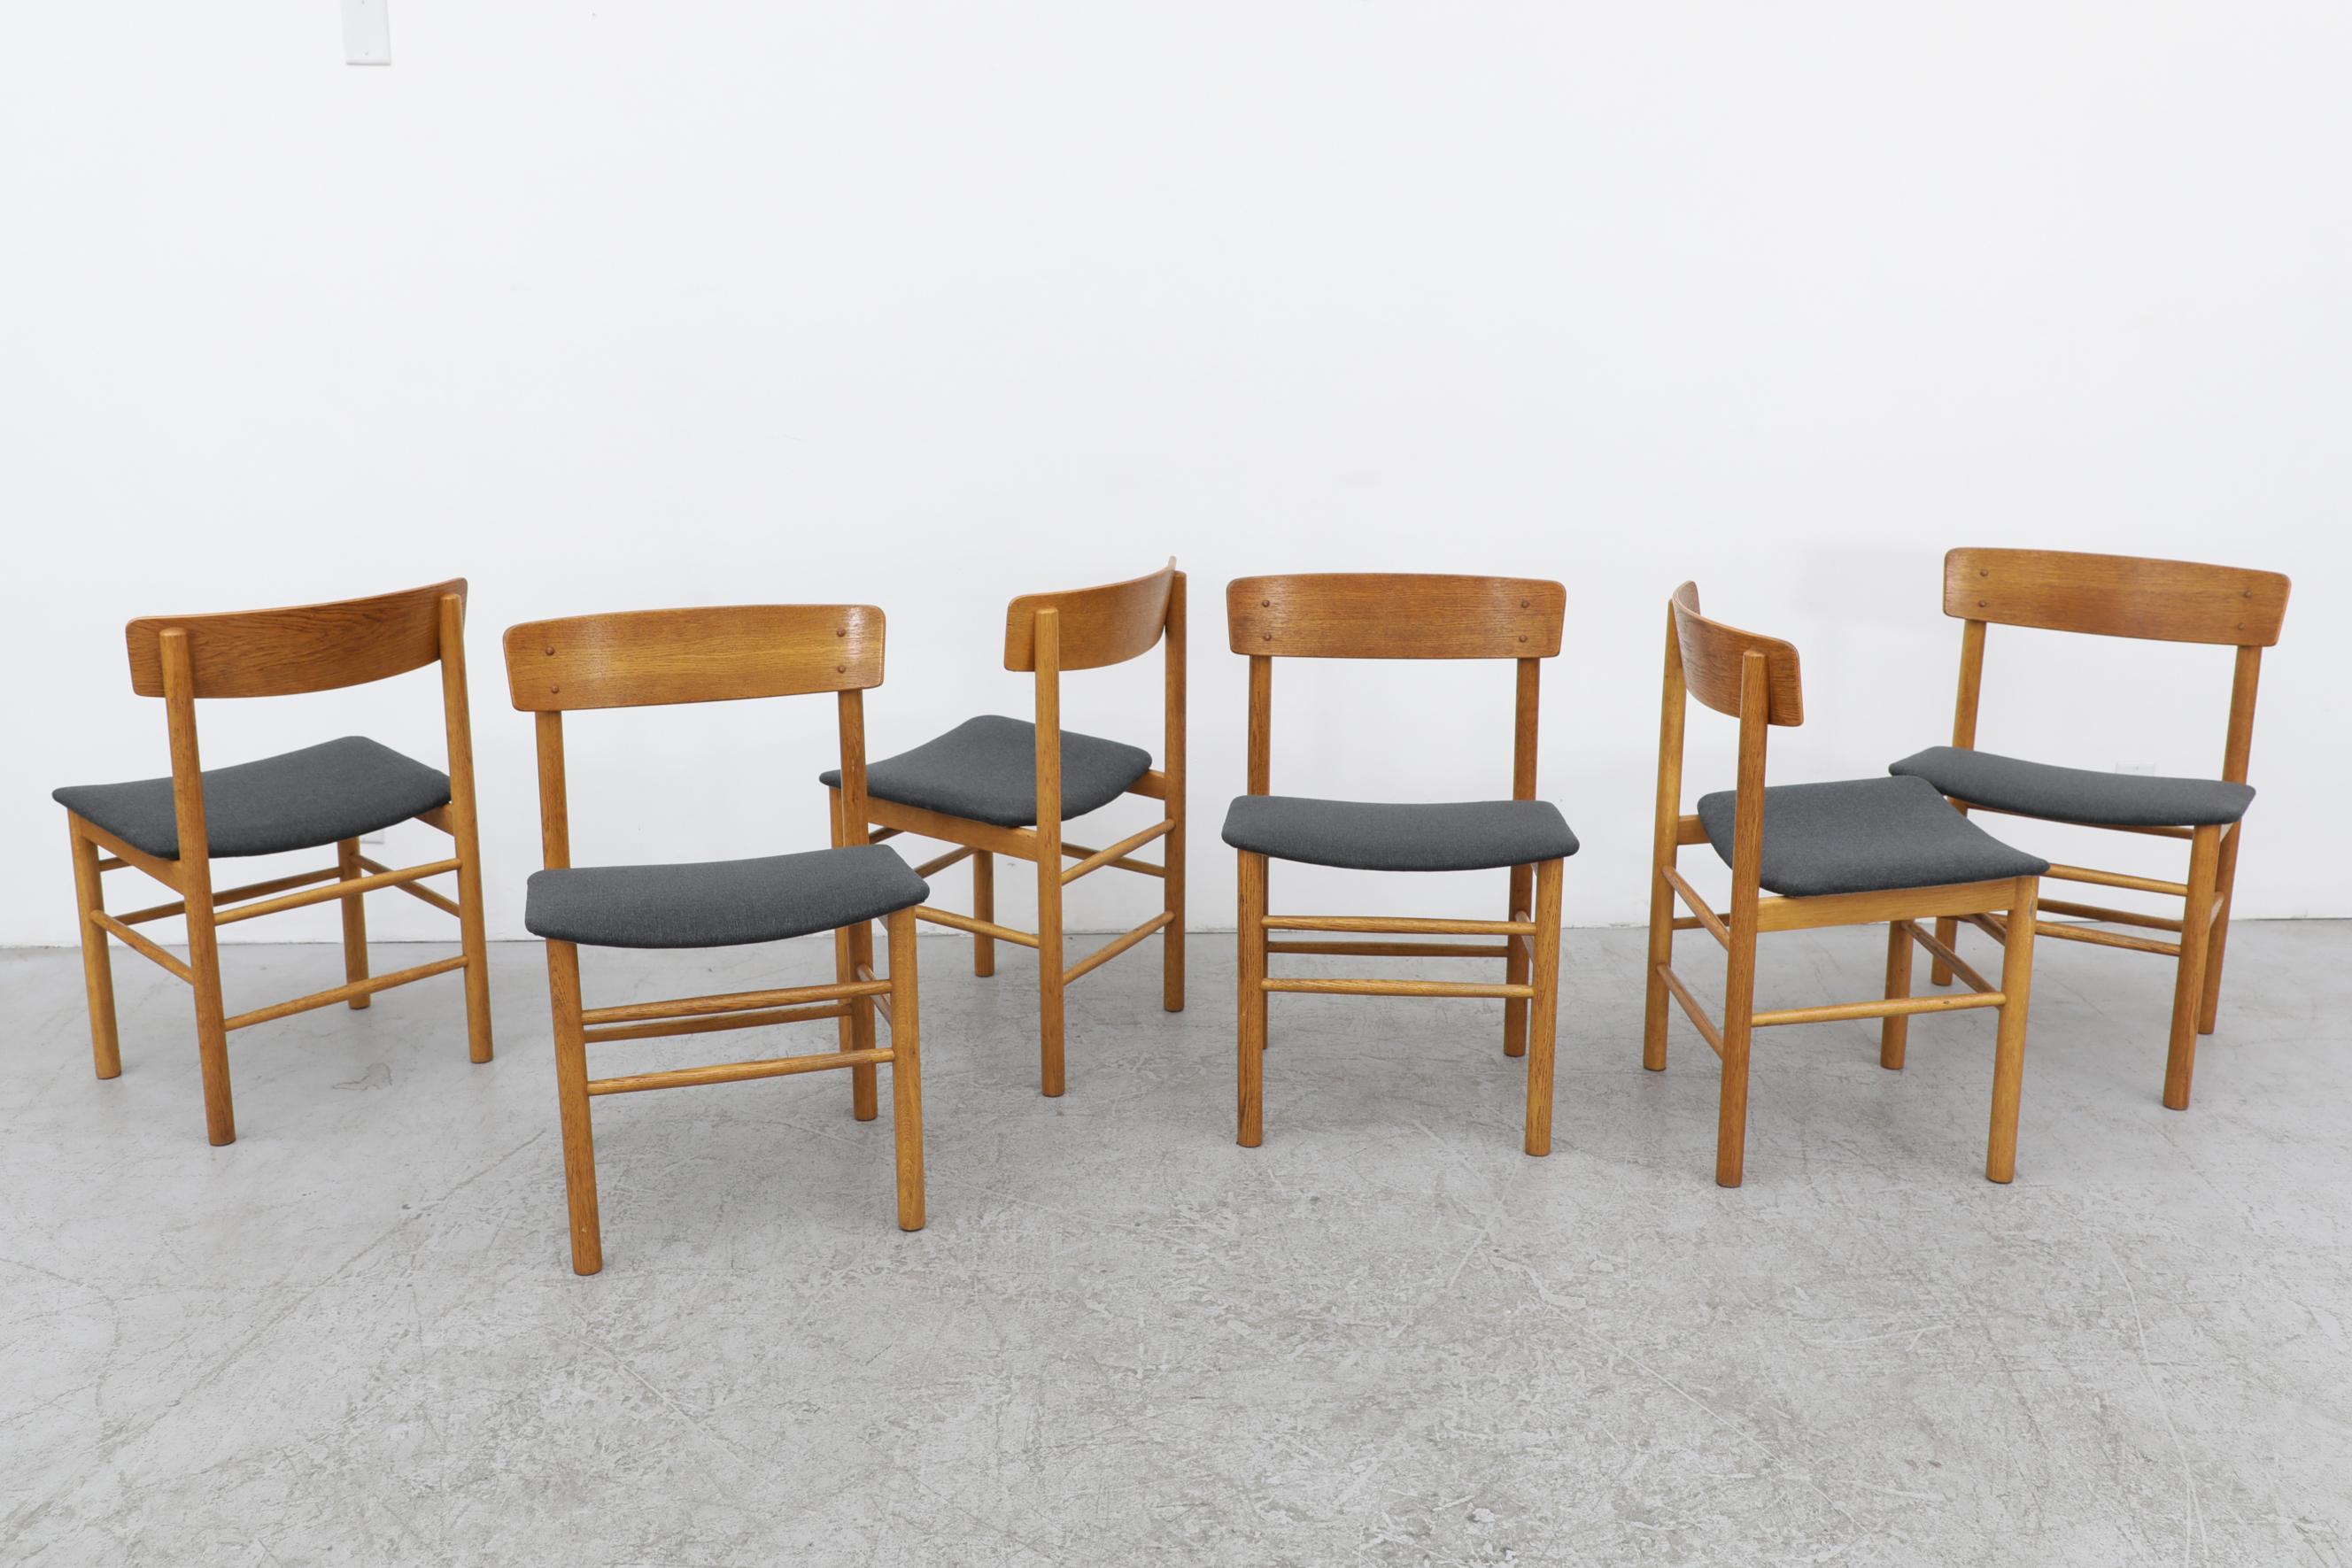 Set of 6 Børge Mogensen oak chairs Model 3236. Mogensen became Head of Design at Fredericia in 1955 and one of his earliest successes was the 3236 Chair which was launched in 1956. Sturdy but elegantly constructed, the chair showcased the designer's